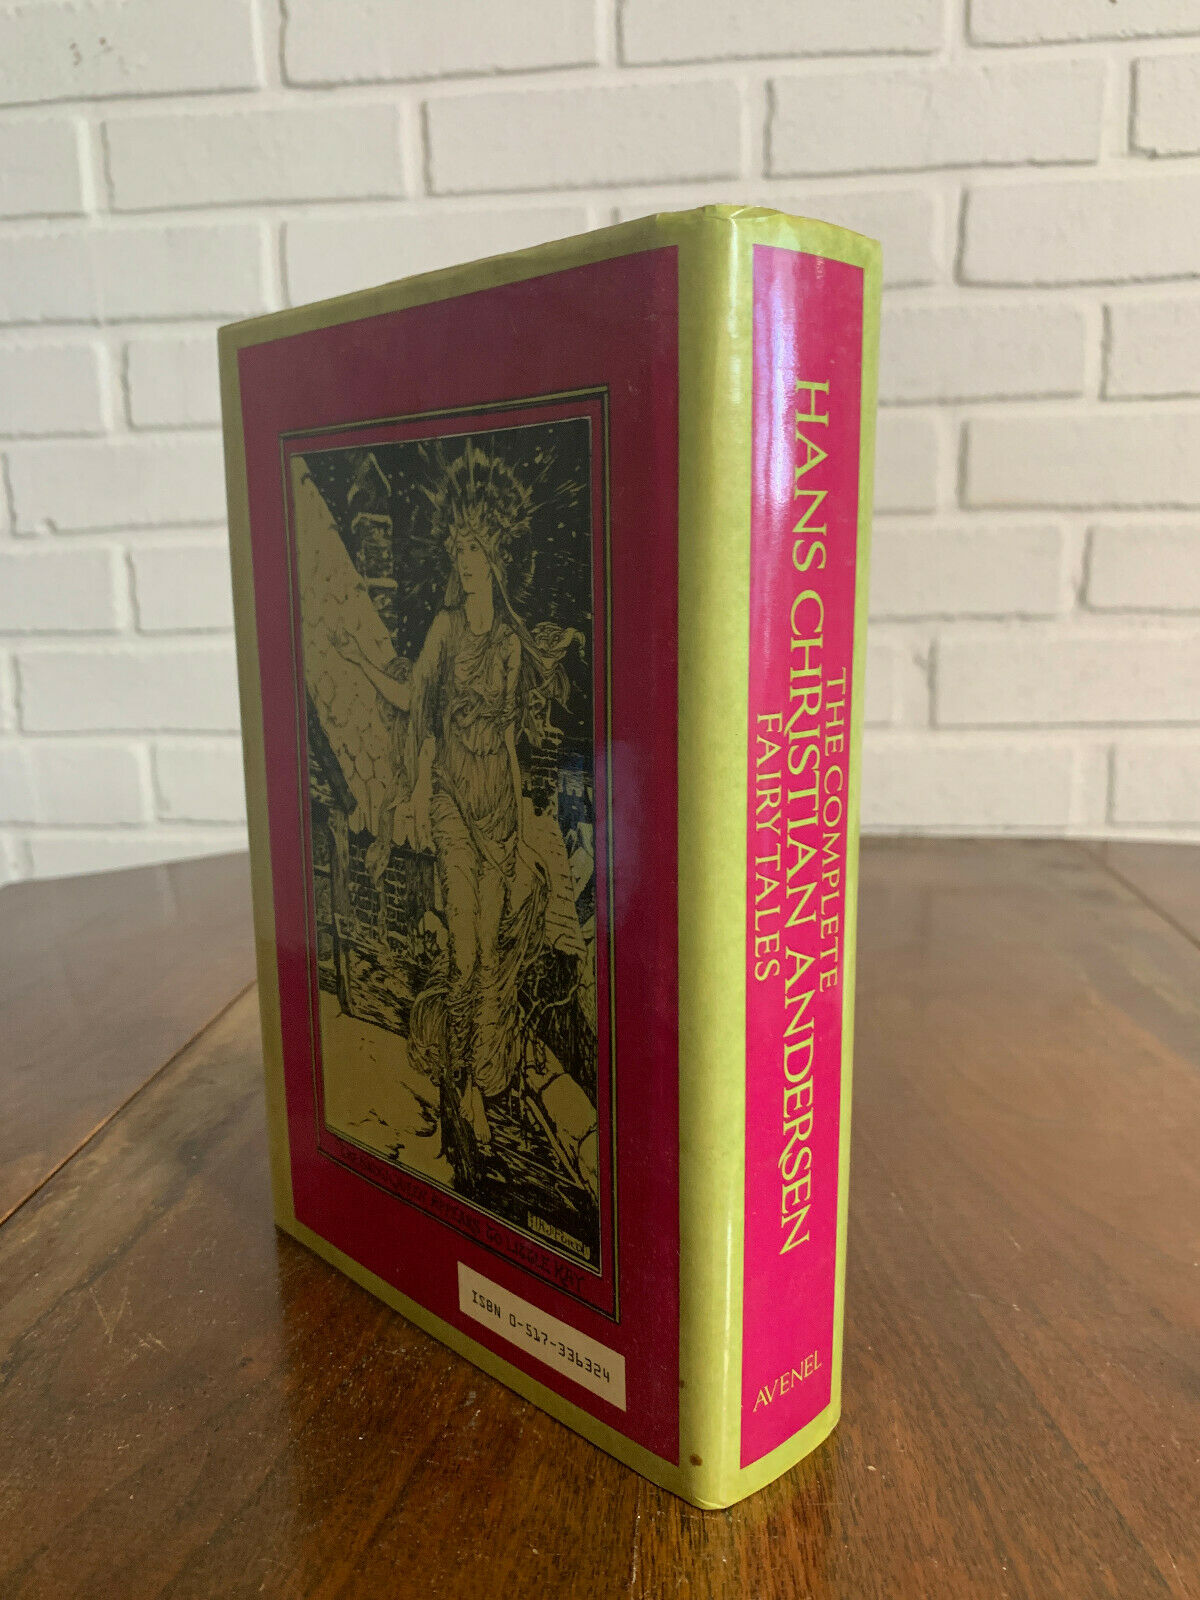 The Complete Hans Christian Andersen edited by Lily Owens [1981 · Avenel Ed.]